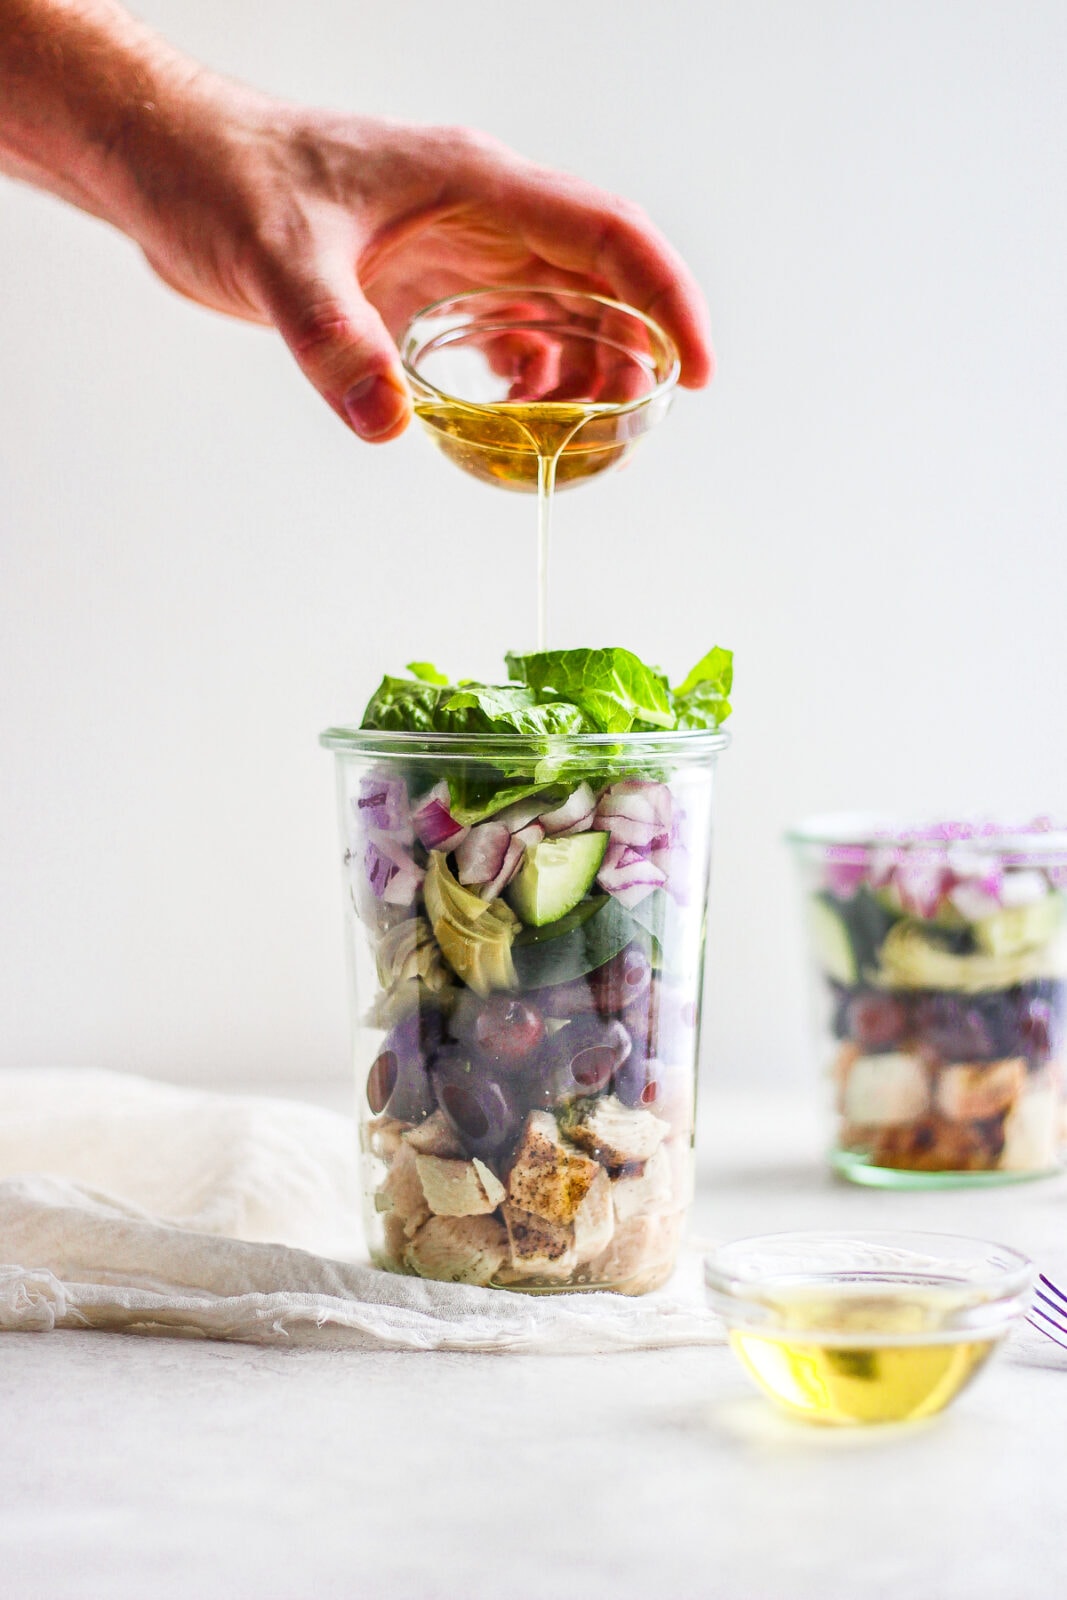 Work Lunch Greek Chicken Salad - an easy on-the-go lunch that is healthy, delicious and filling! #whole30 #whole30recipes #worklunch #onthegolunches #paleorecipes #worklunches